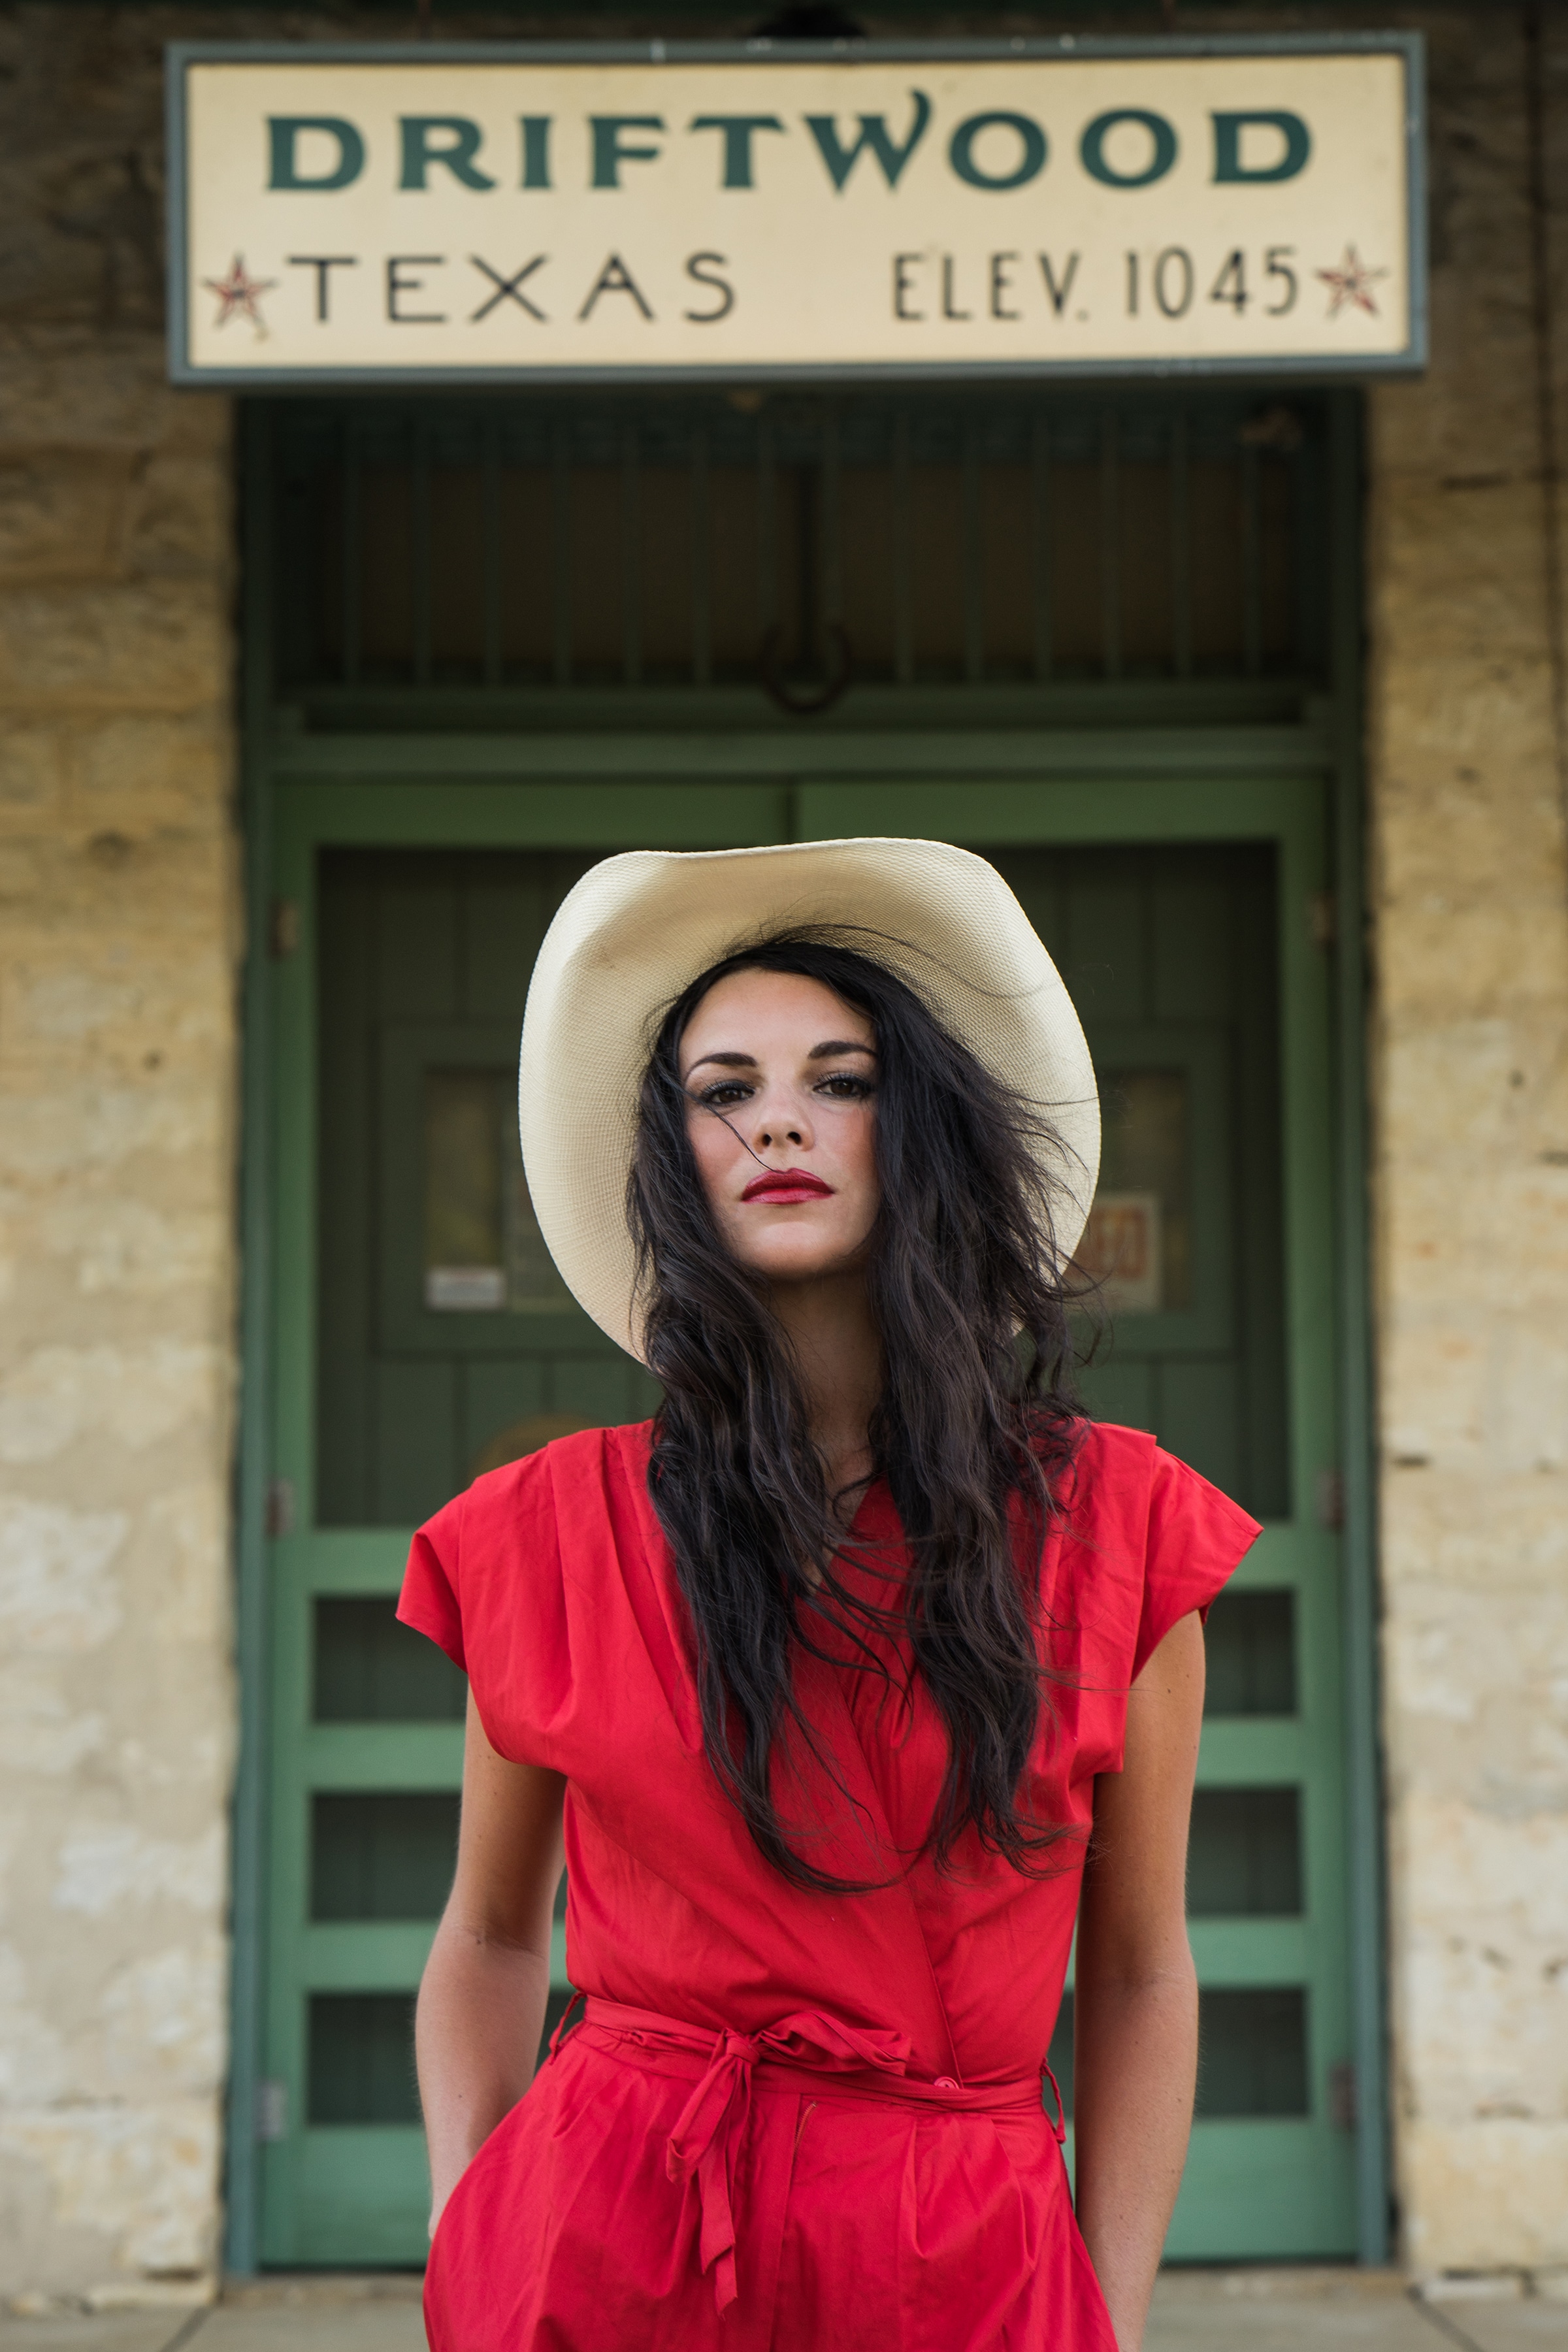 Song Premiere: Whitney Rose, “My Boots”